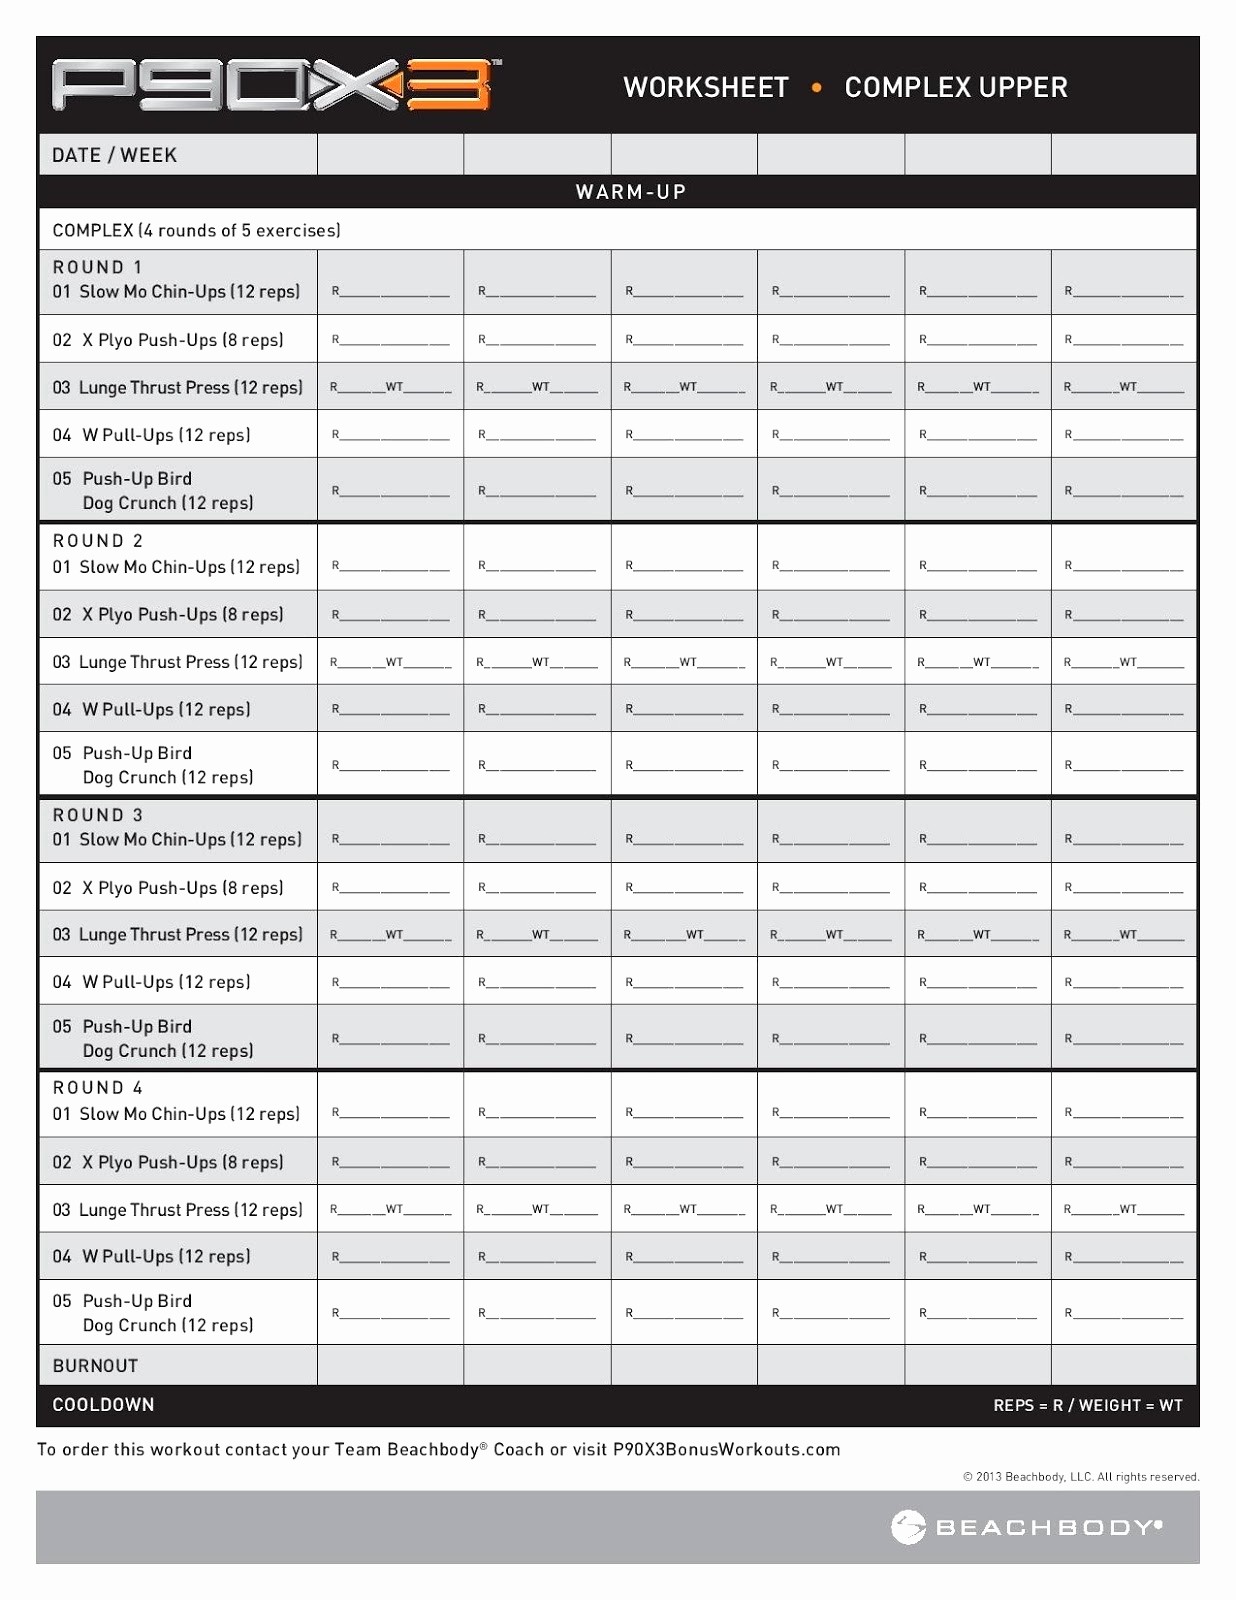 P90x Classic Worksheets Lovely Workout Sheets Pdf Best